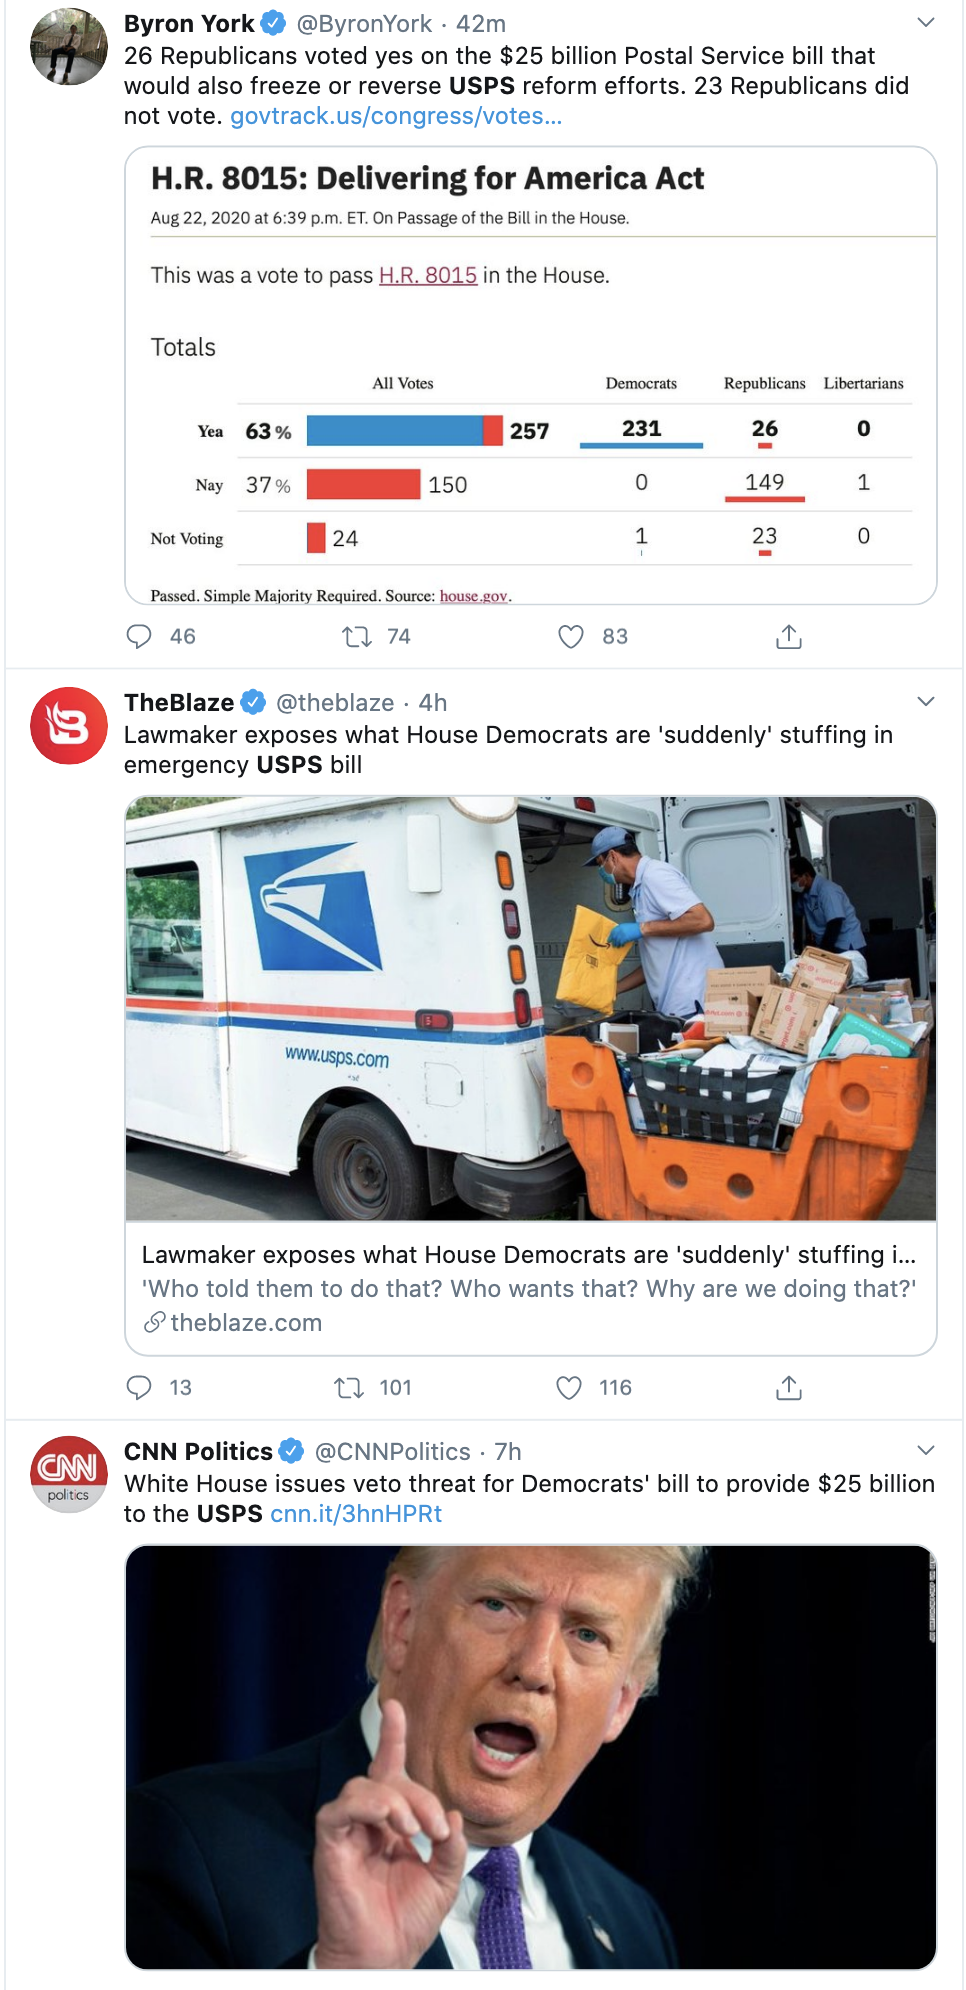 Screen-Shot-2020-08-23-at-8.50.57-AM USPS Employees Defect & Publicly Defy Trump Orders Election 2020 Featured National Security Politics Top Stories 